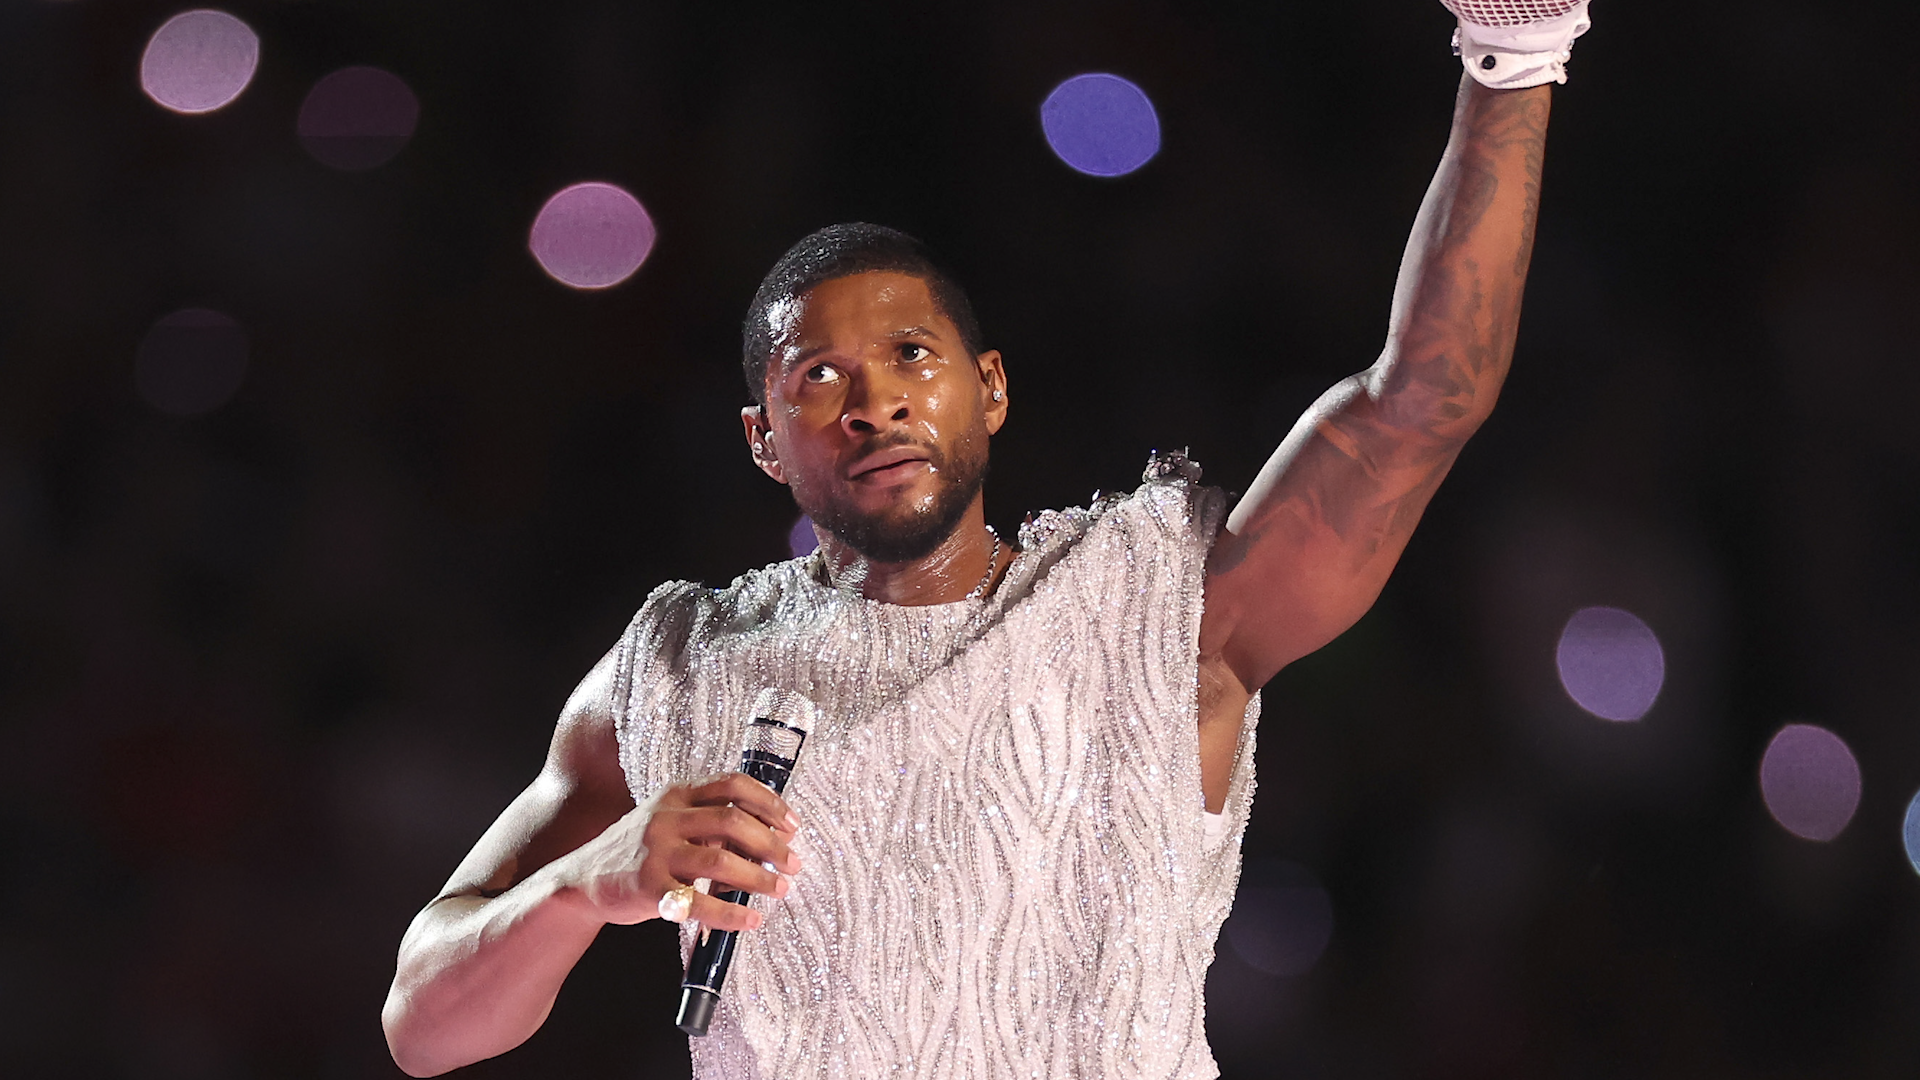 LA Knight Requests Usher’s Performance of ‘Yeah’ for WrestleMania 40 Entrance